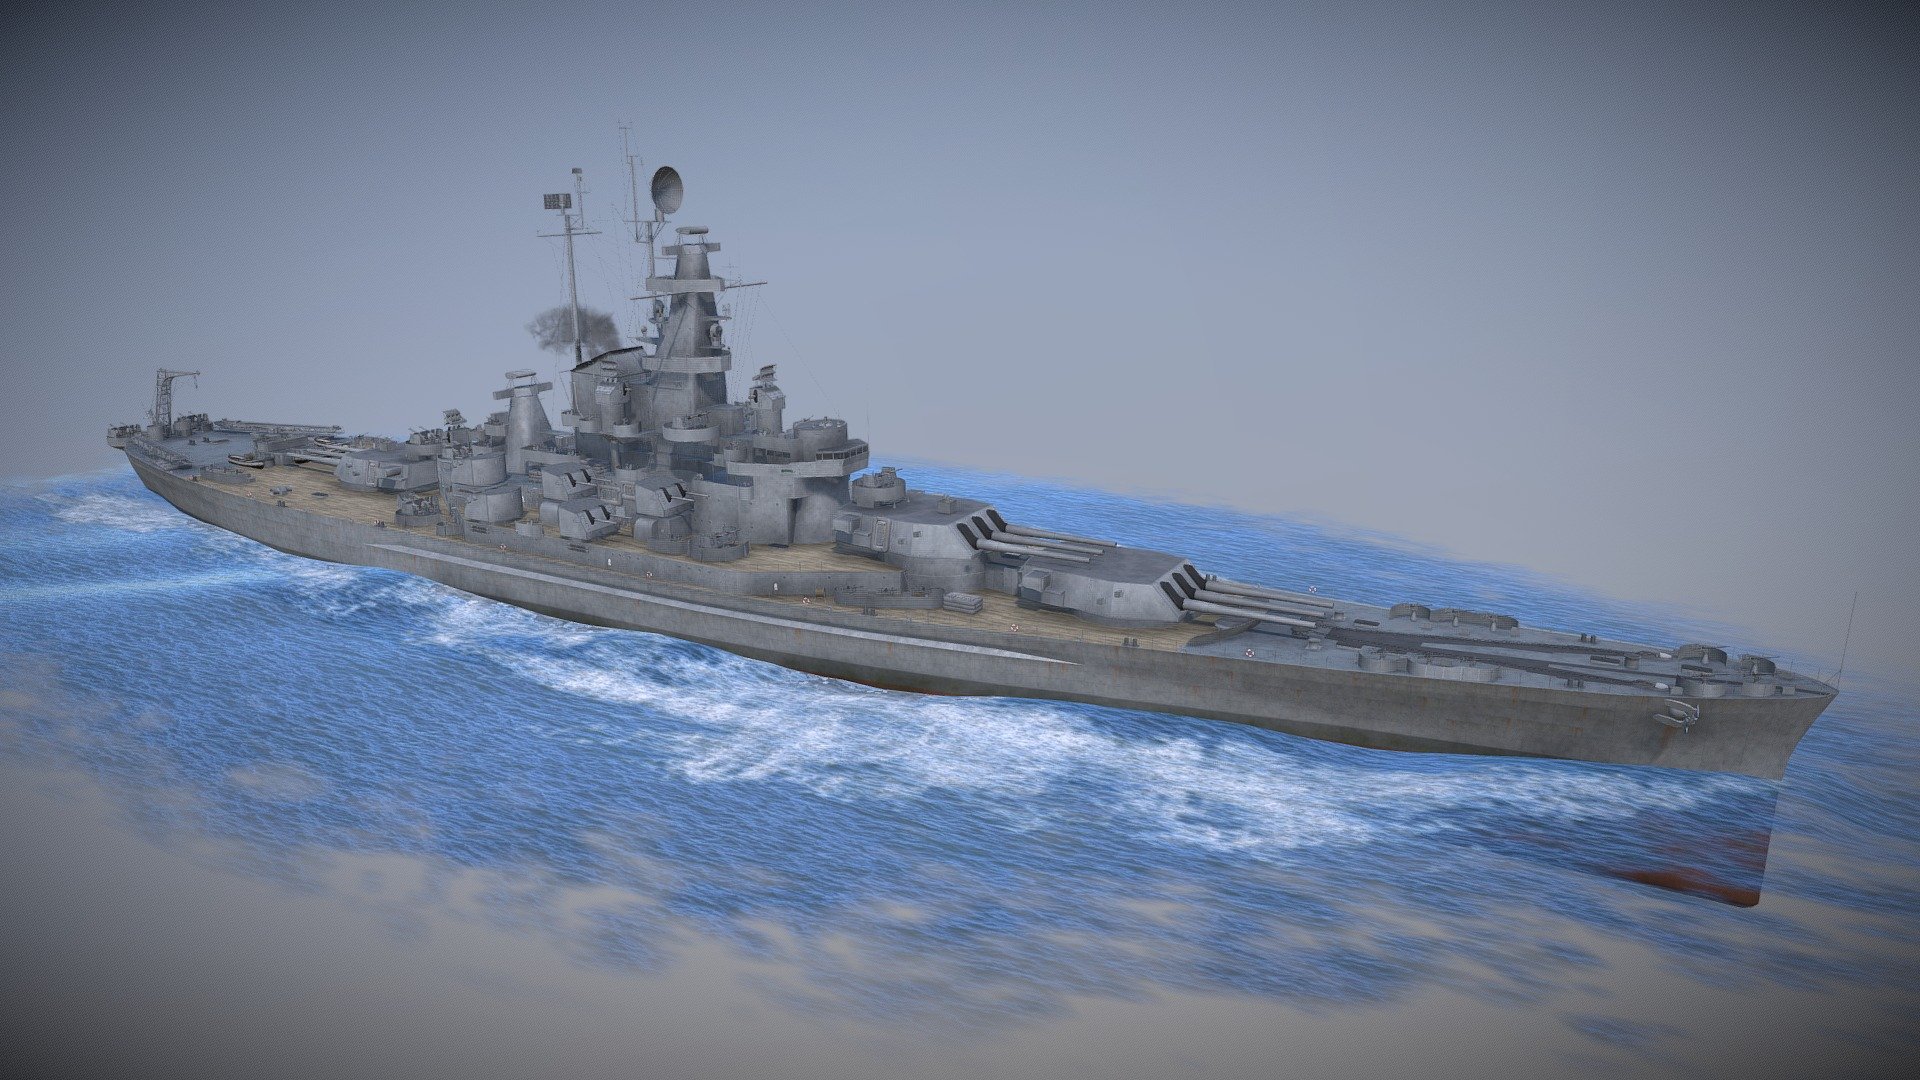 The USS Alabama (BB-60) was a South Dakota class Battleship of the United States Navy during World War II.
She is preserved as a museum ship since 1964 at the Battleship Memorial Park in Alabama.

(reuploaded on 11/20/2021 with new textures for hull and boats) - Alabama - Buy Royalty Free 3D model by ThomasBeerens 3d model